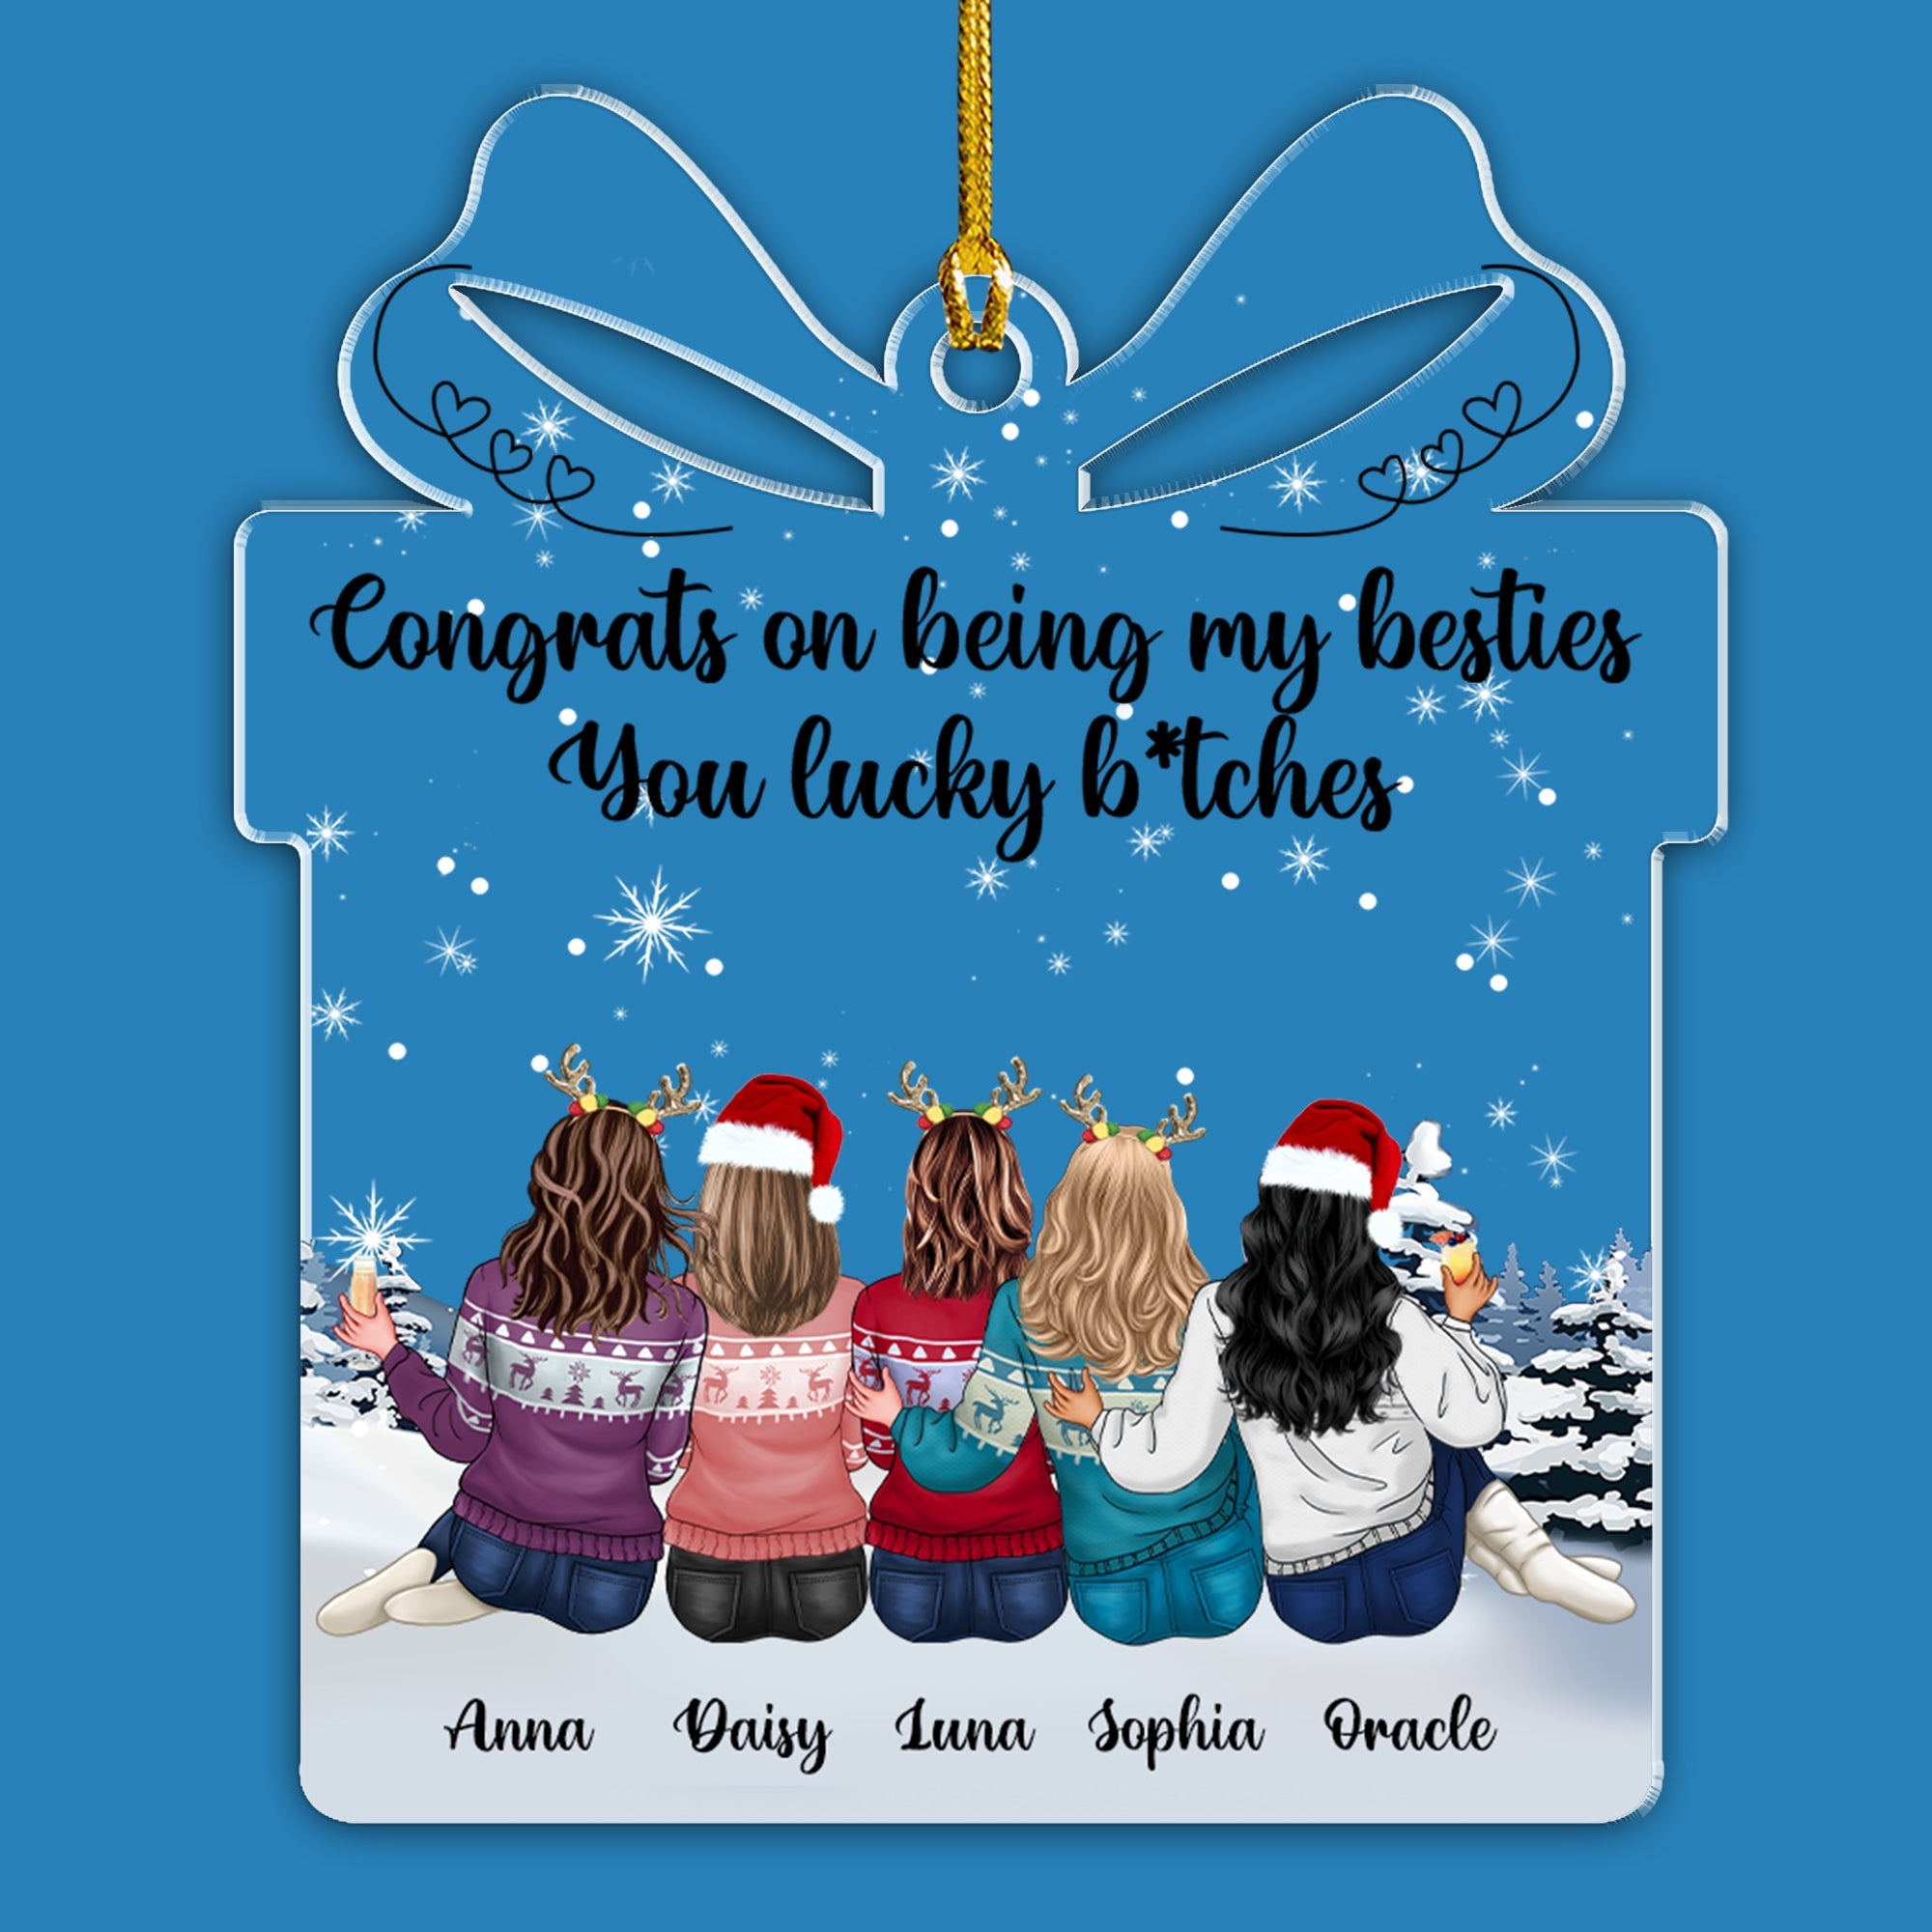 Congrats On Being Bestie Christmas Box - Personalized Custom Shape Acrylic Ornament